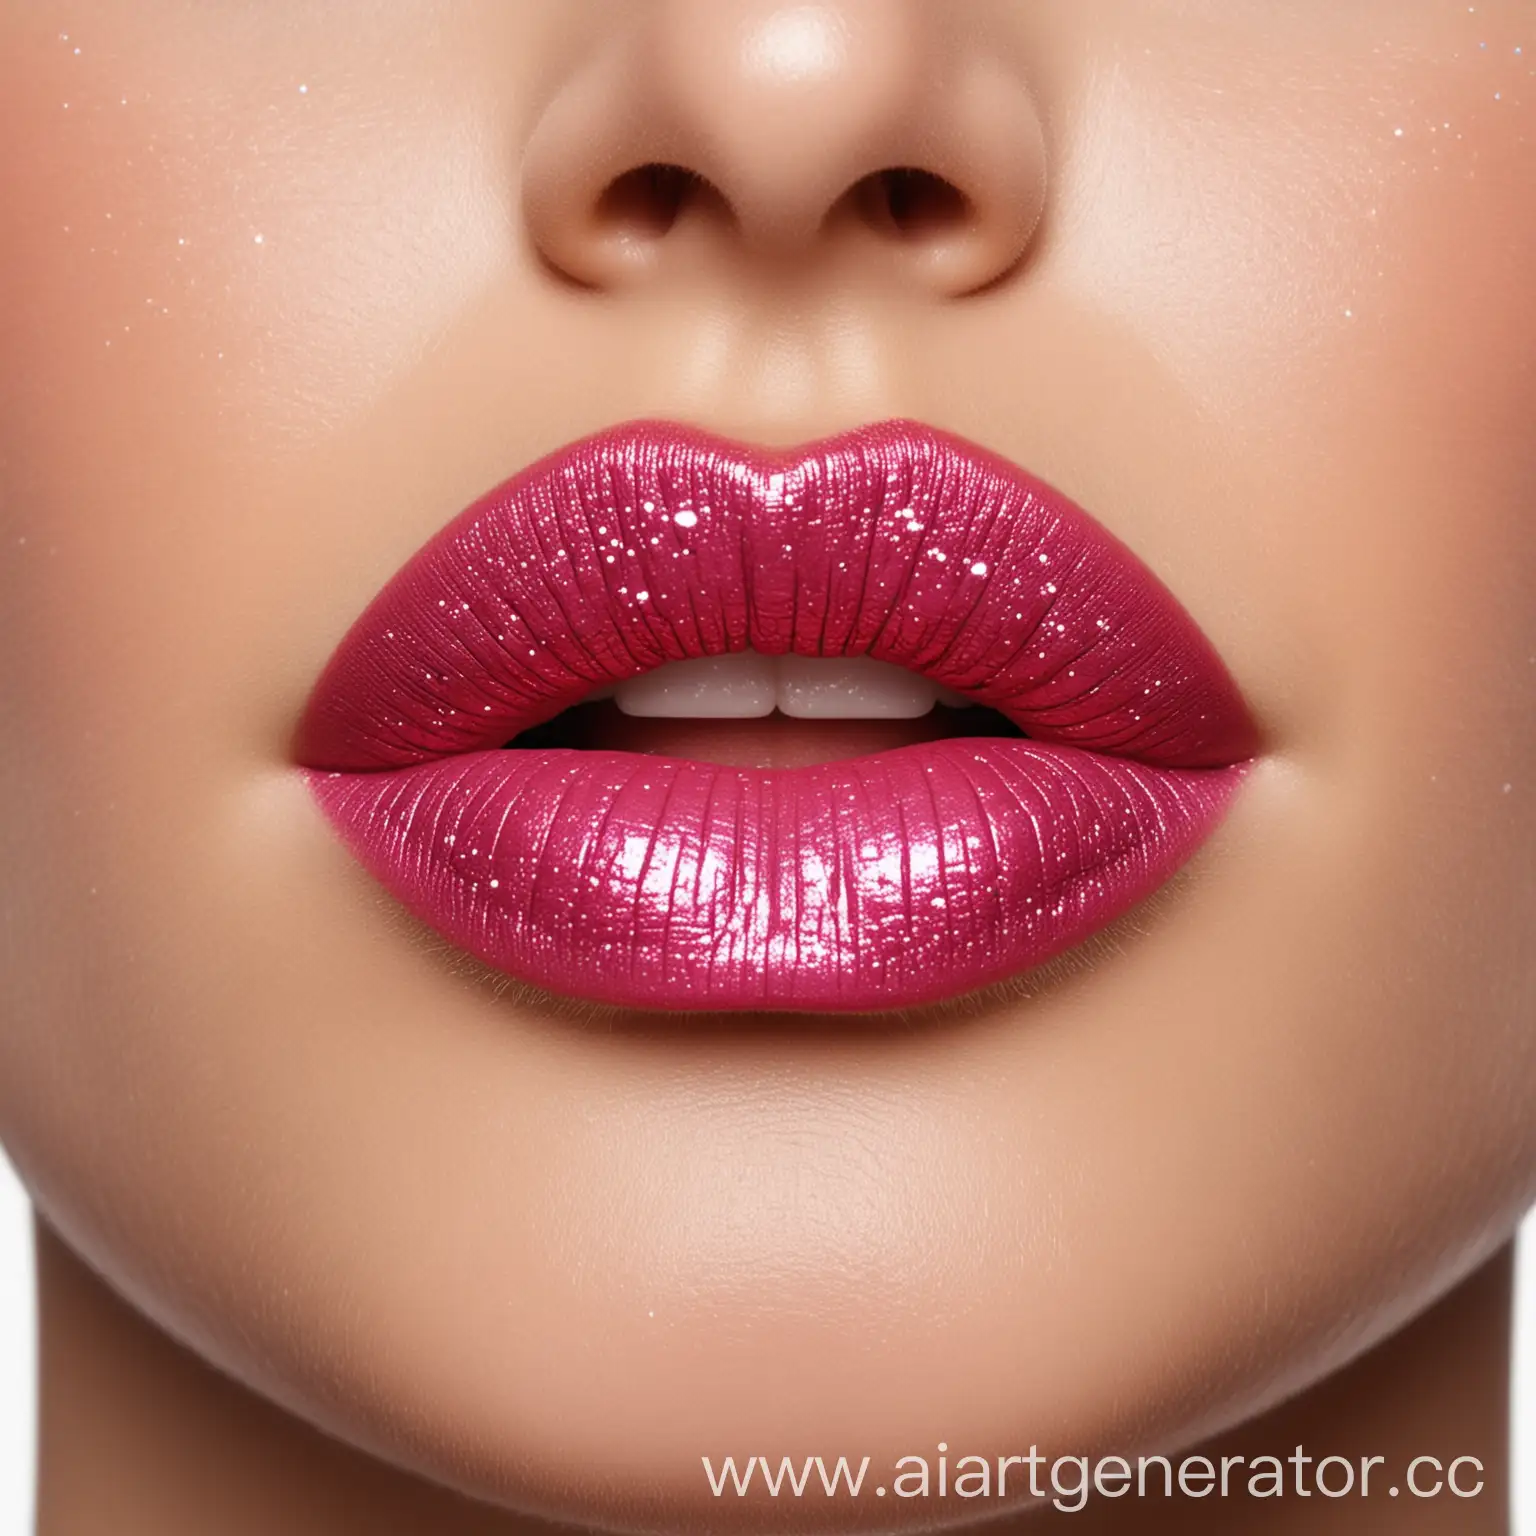 Sparkling-Lipstick-with-Glitter-Shimmering-Cosmetic-Beauty-Product